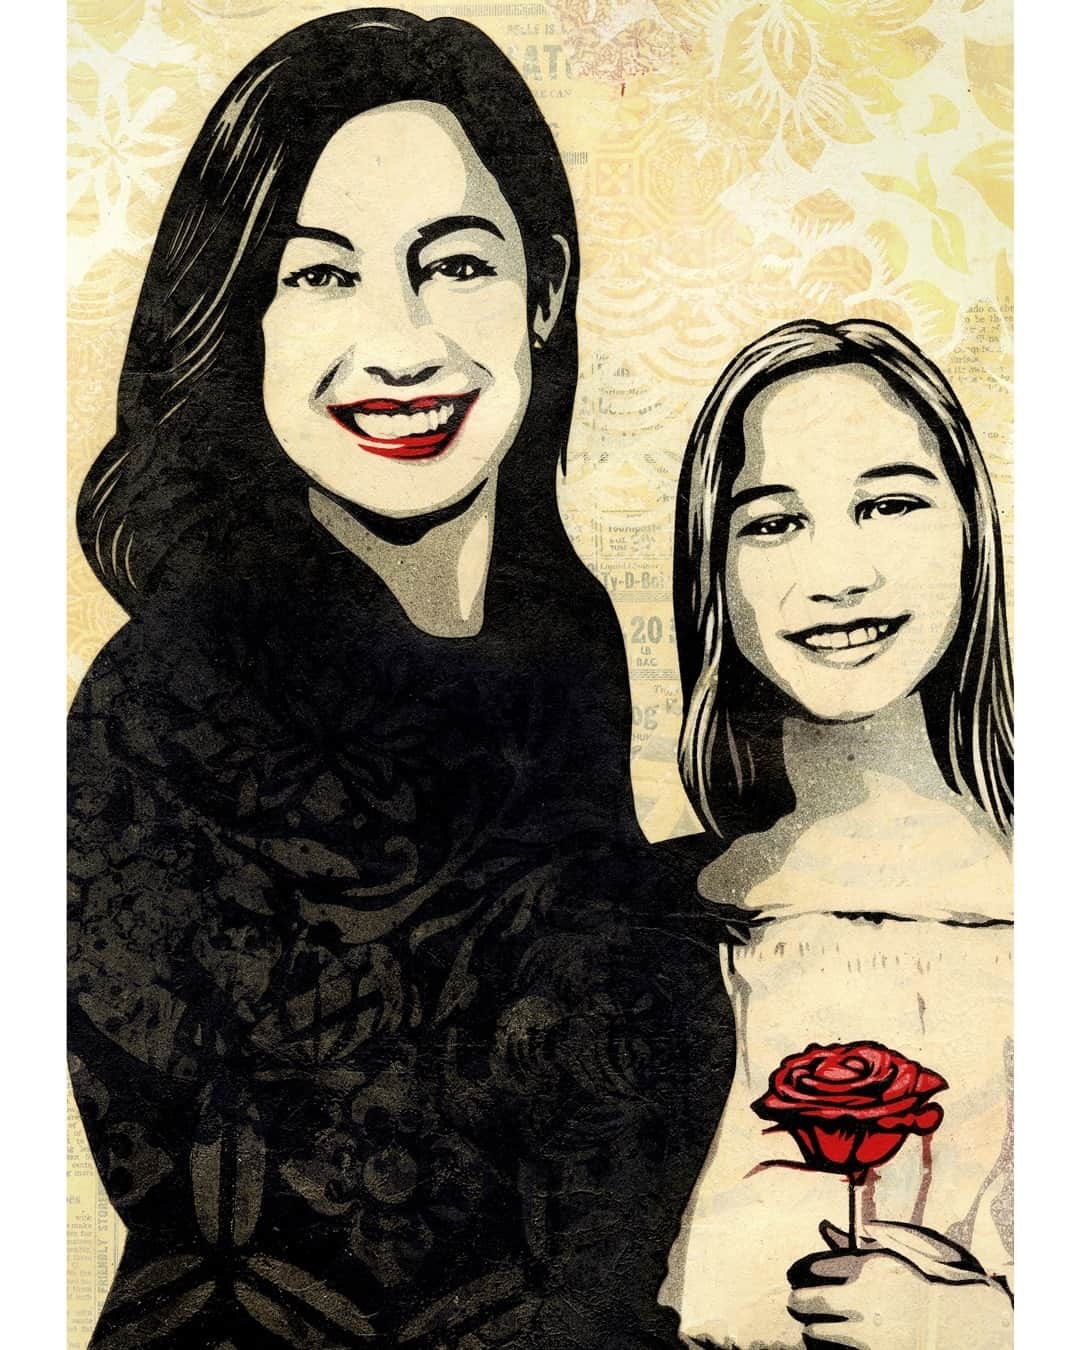 Shepard Faireyのインスタグラム：「Today is my wife Amanda’s birthday. We have been together 22 years, and yes, she was legal age when we started dating! She has helped me with my art, whether it be screen-printing, poster bombing, or just honest critique. She has helped me build our business and philanthropy efforts. She is the greatest, most loving, mom to our daughters Vivienne and Madeline (Madeline pictured with rose). All of that I’m incredibly grateful for, but above all I value her as my best friend and the person I trust most in the world to have my back but to also be brutally honest. Thanks for it all Amanda and happy birthday (I’m really glad you were born)!⁠ -Shepard」